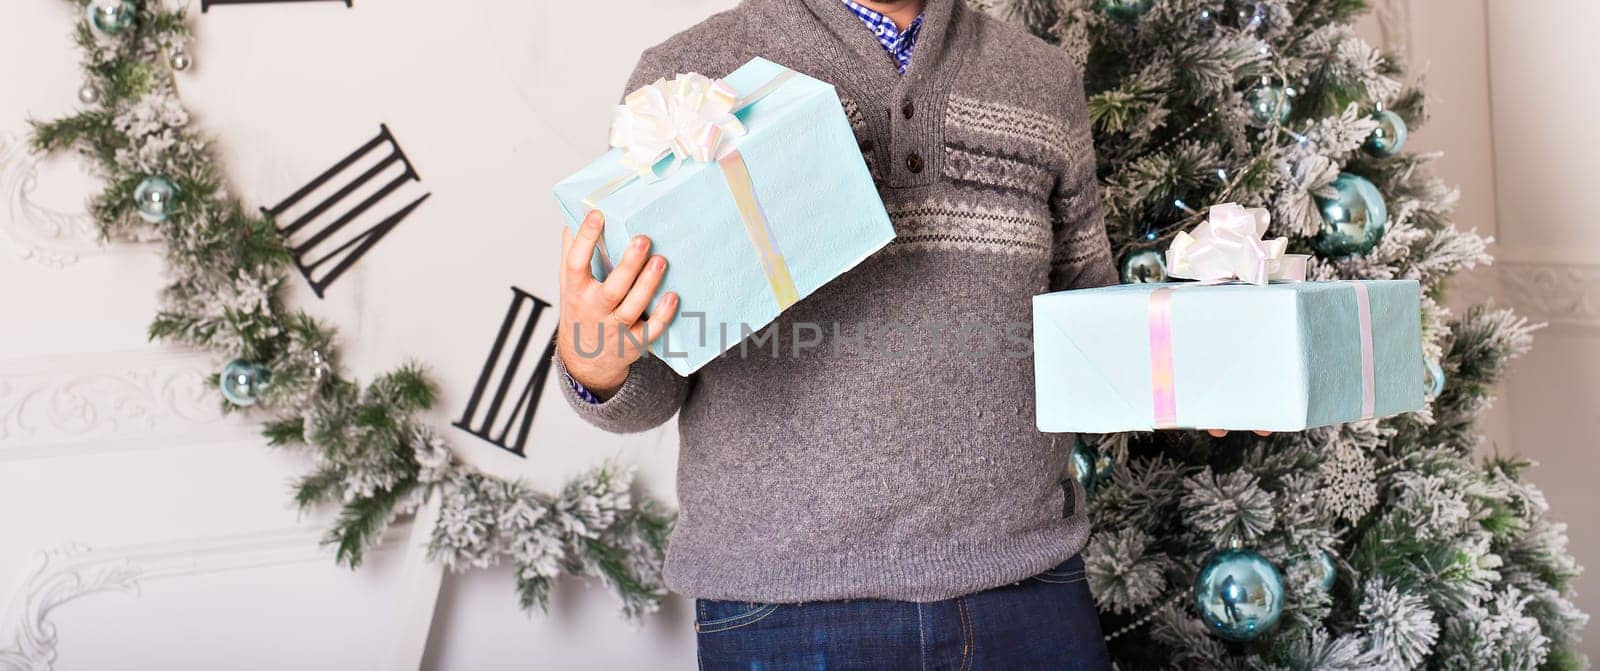 Young man holding gifts in front of Christmas tree.